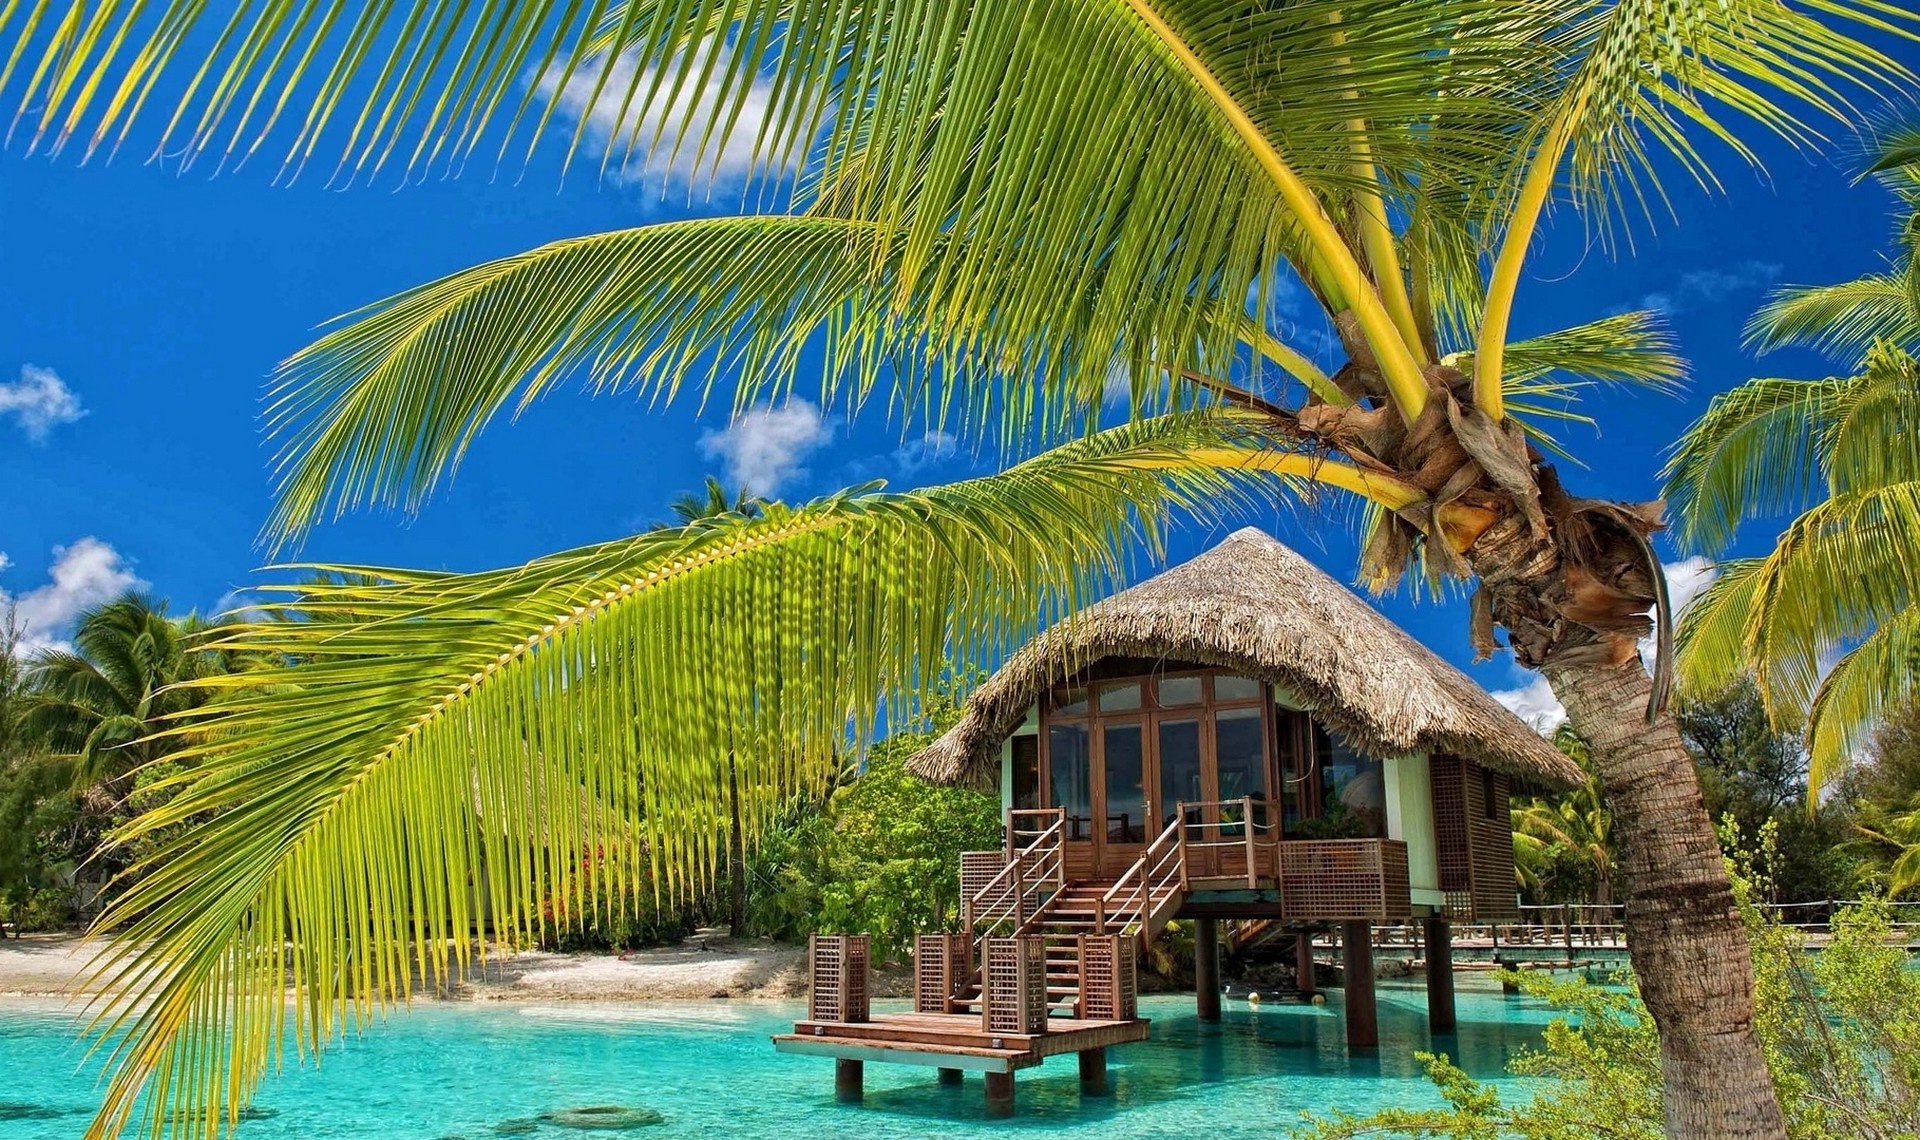 Bungalow: Tropical island in the heart of the ocean, Palm trees on the sandy beach, Small vacation house. 1920x1140 HD Background.